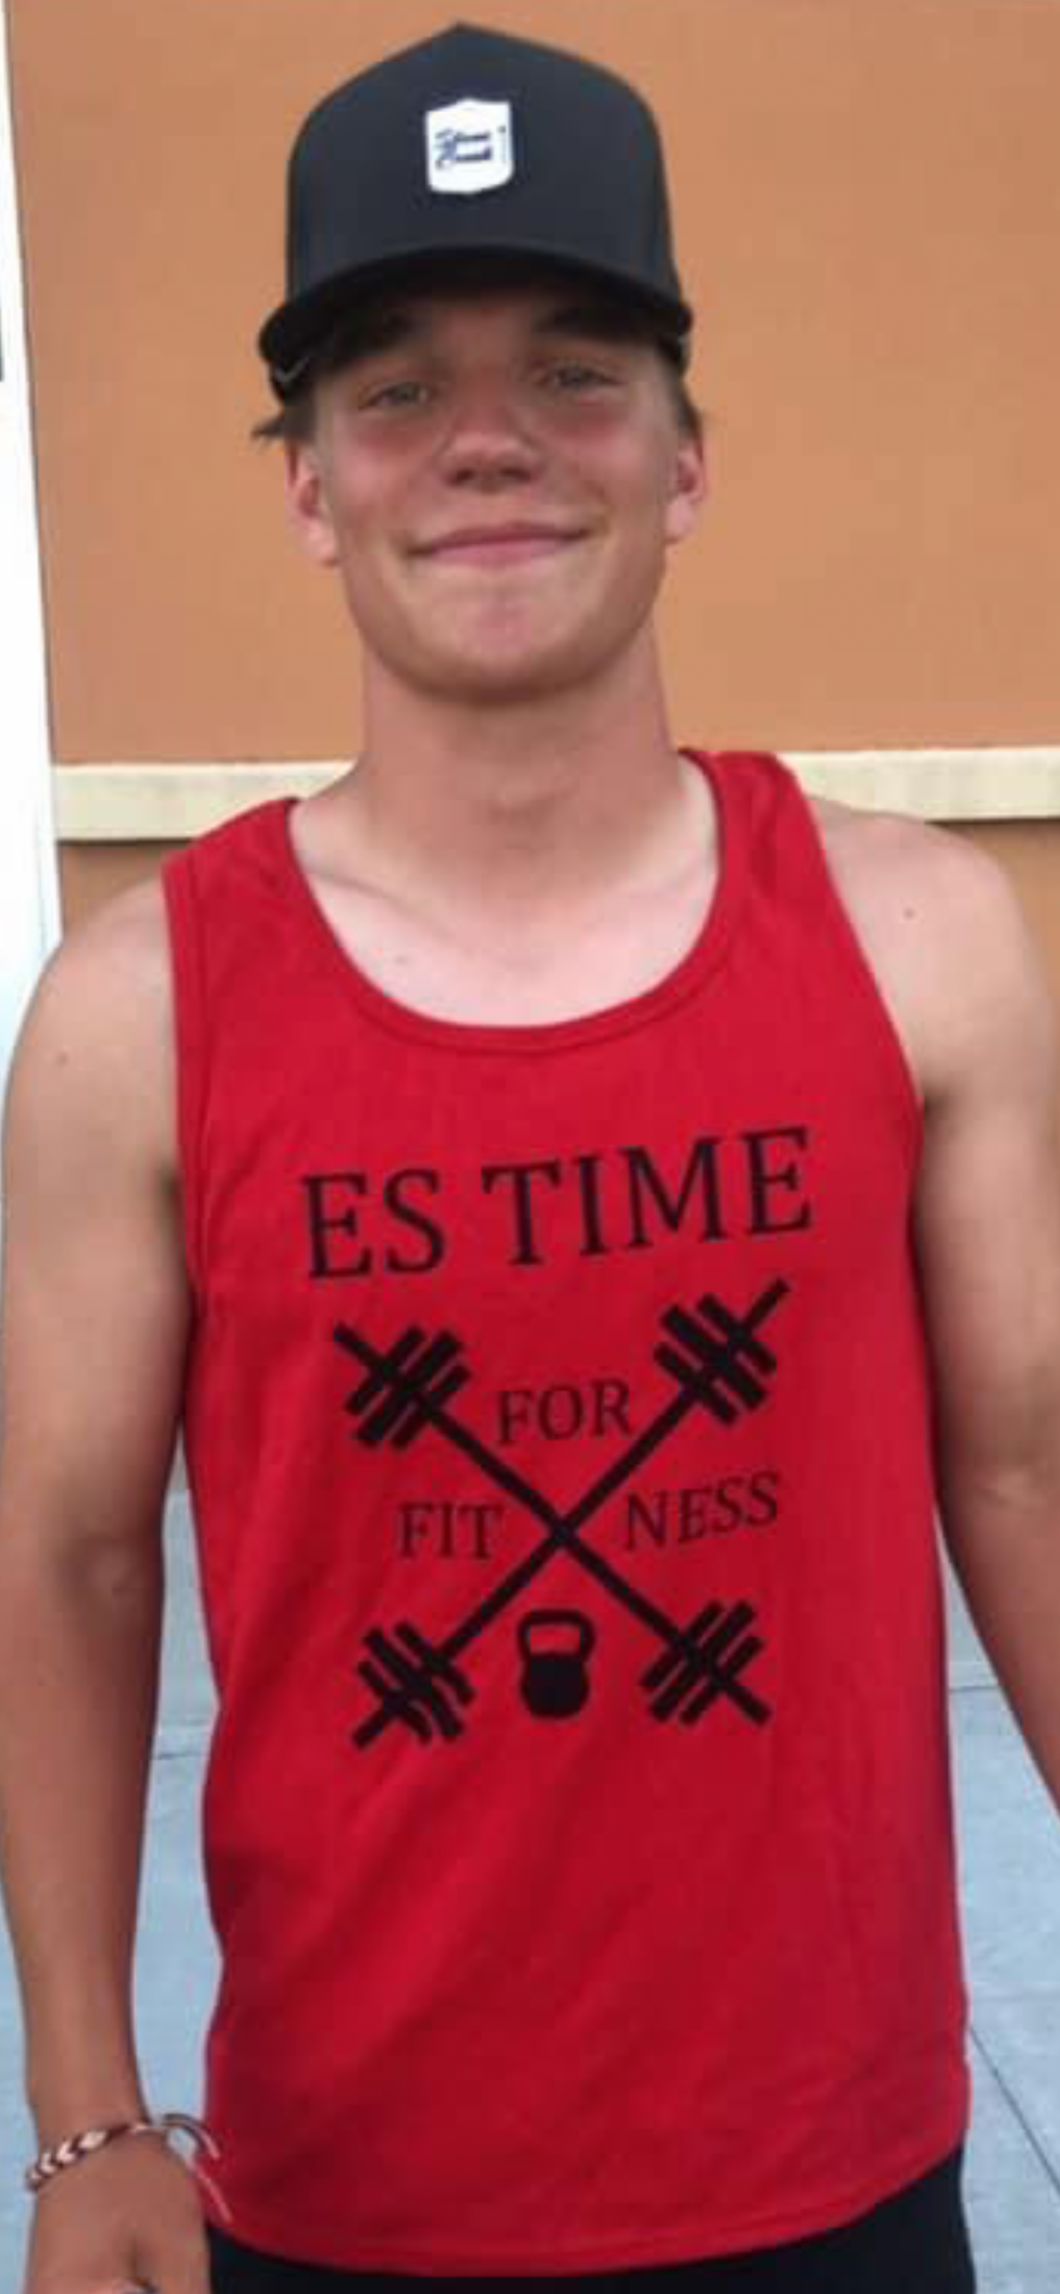 ES TIME FOR FITNESS Tank Top Red  Black Logo Different Sizes